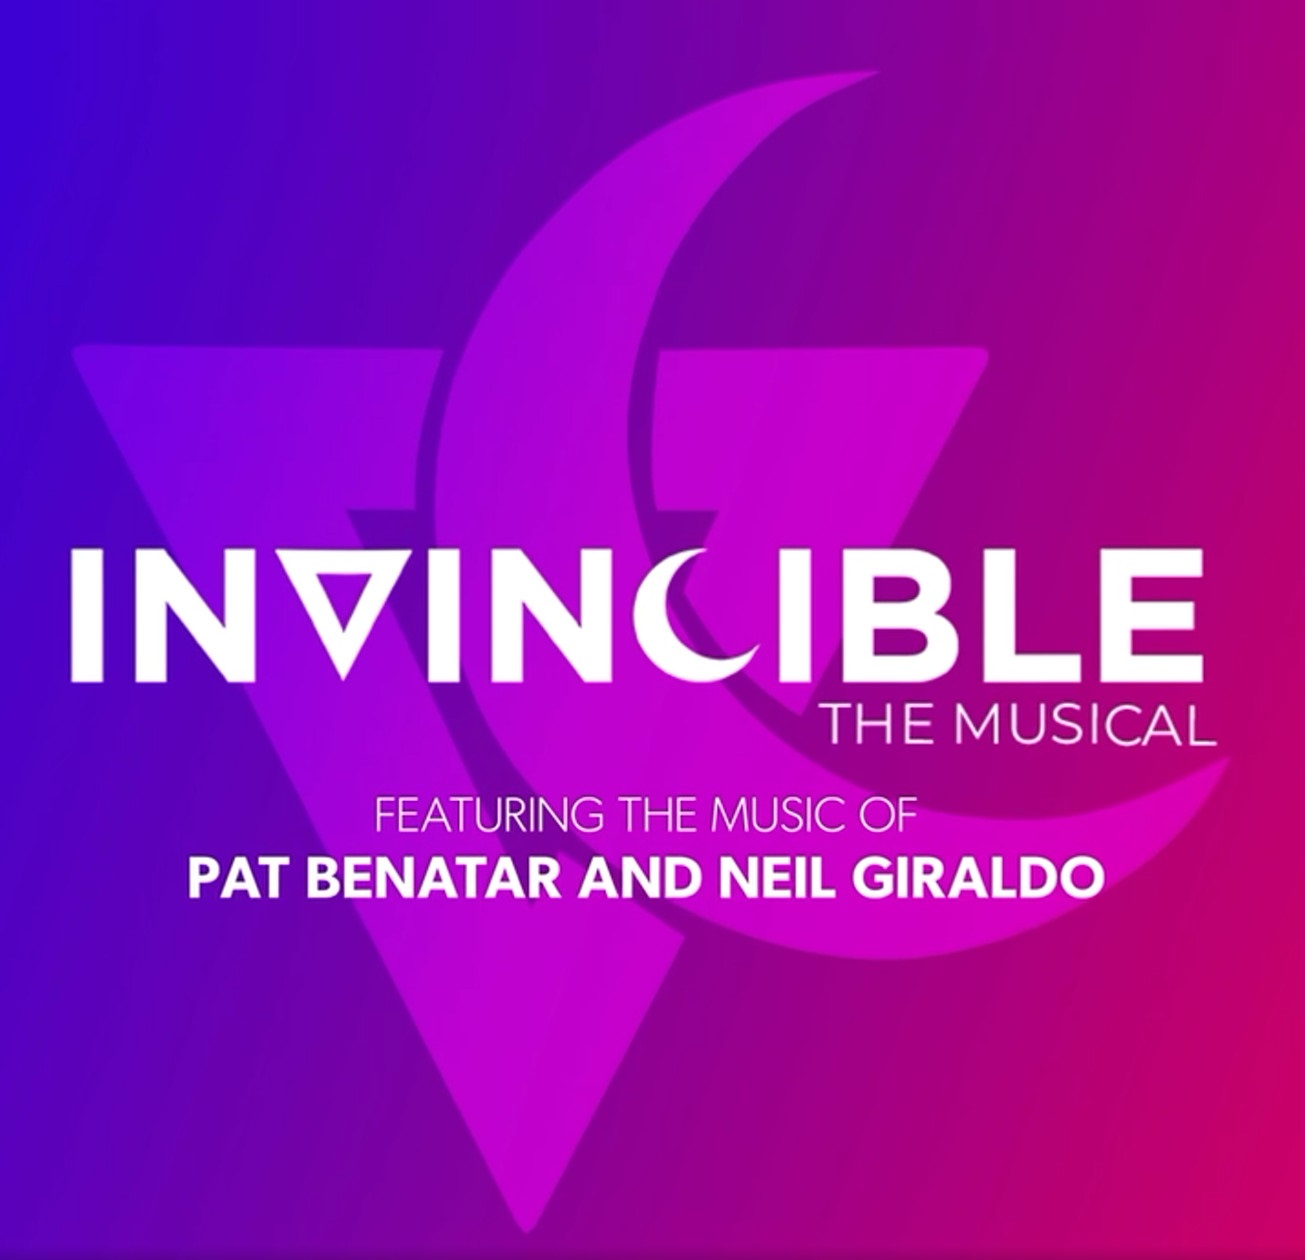 Pat Benatar and Neil Giraldo’s Musical ‘Invincible’ Gets L.A. Industry Presentation (EXCLUSIVE)